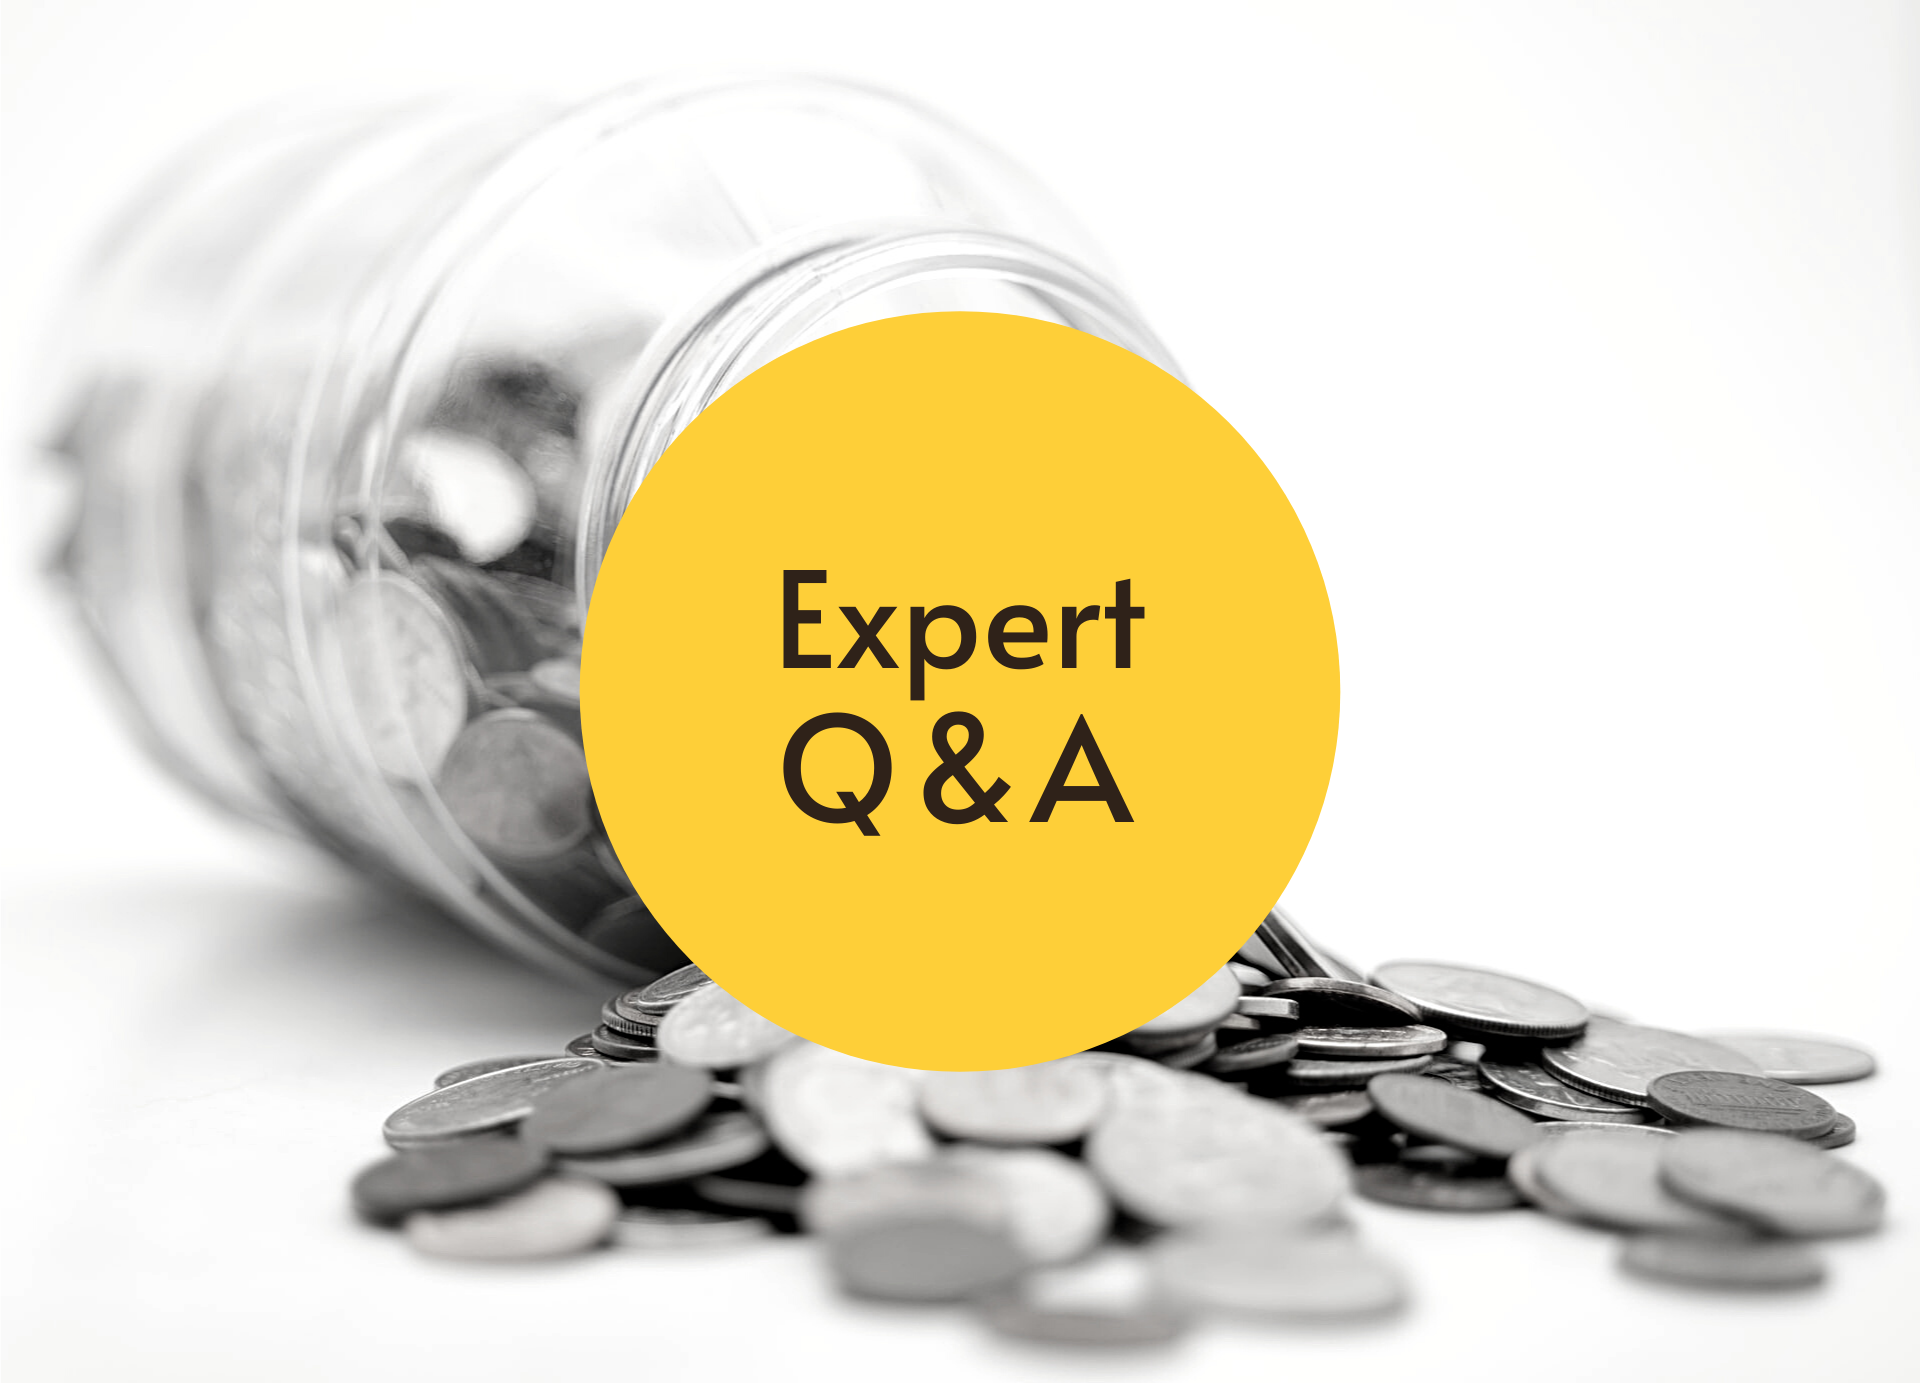 Black & white image of a jar of coins that has been spilled over. On top is a yellow circle and text that reads: Expert Q&A.